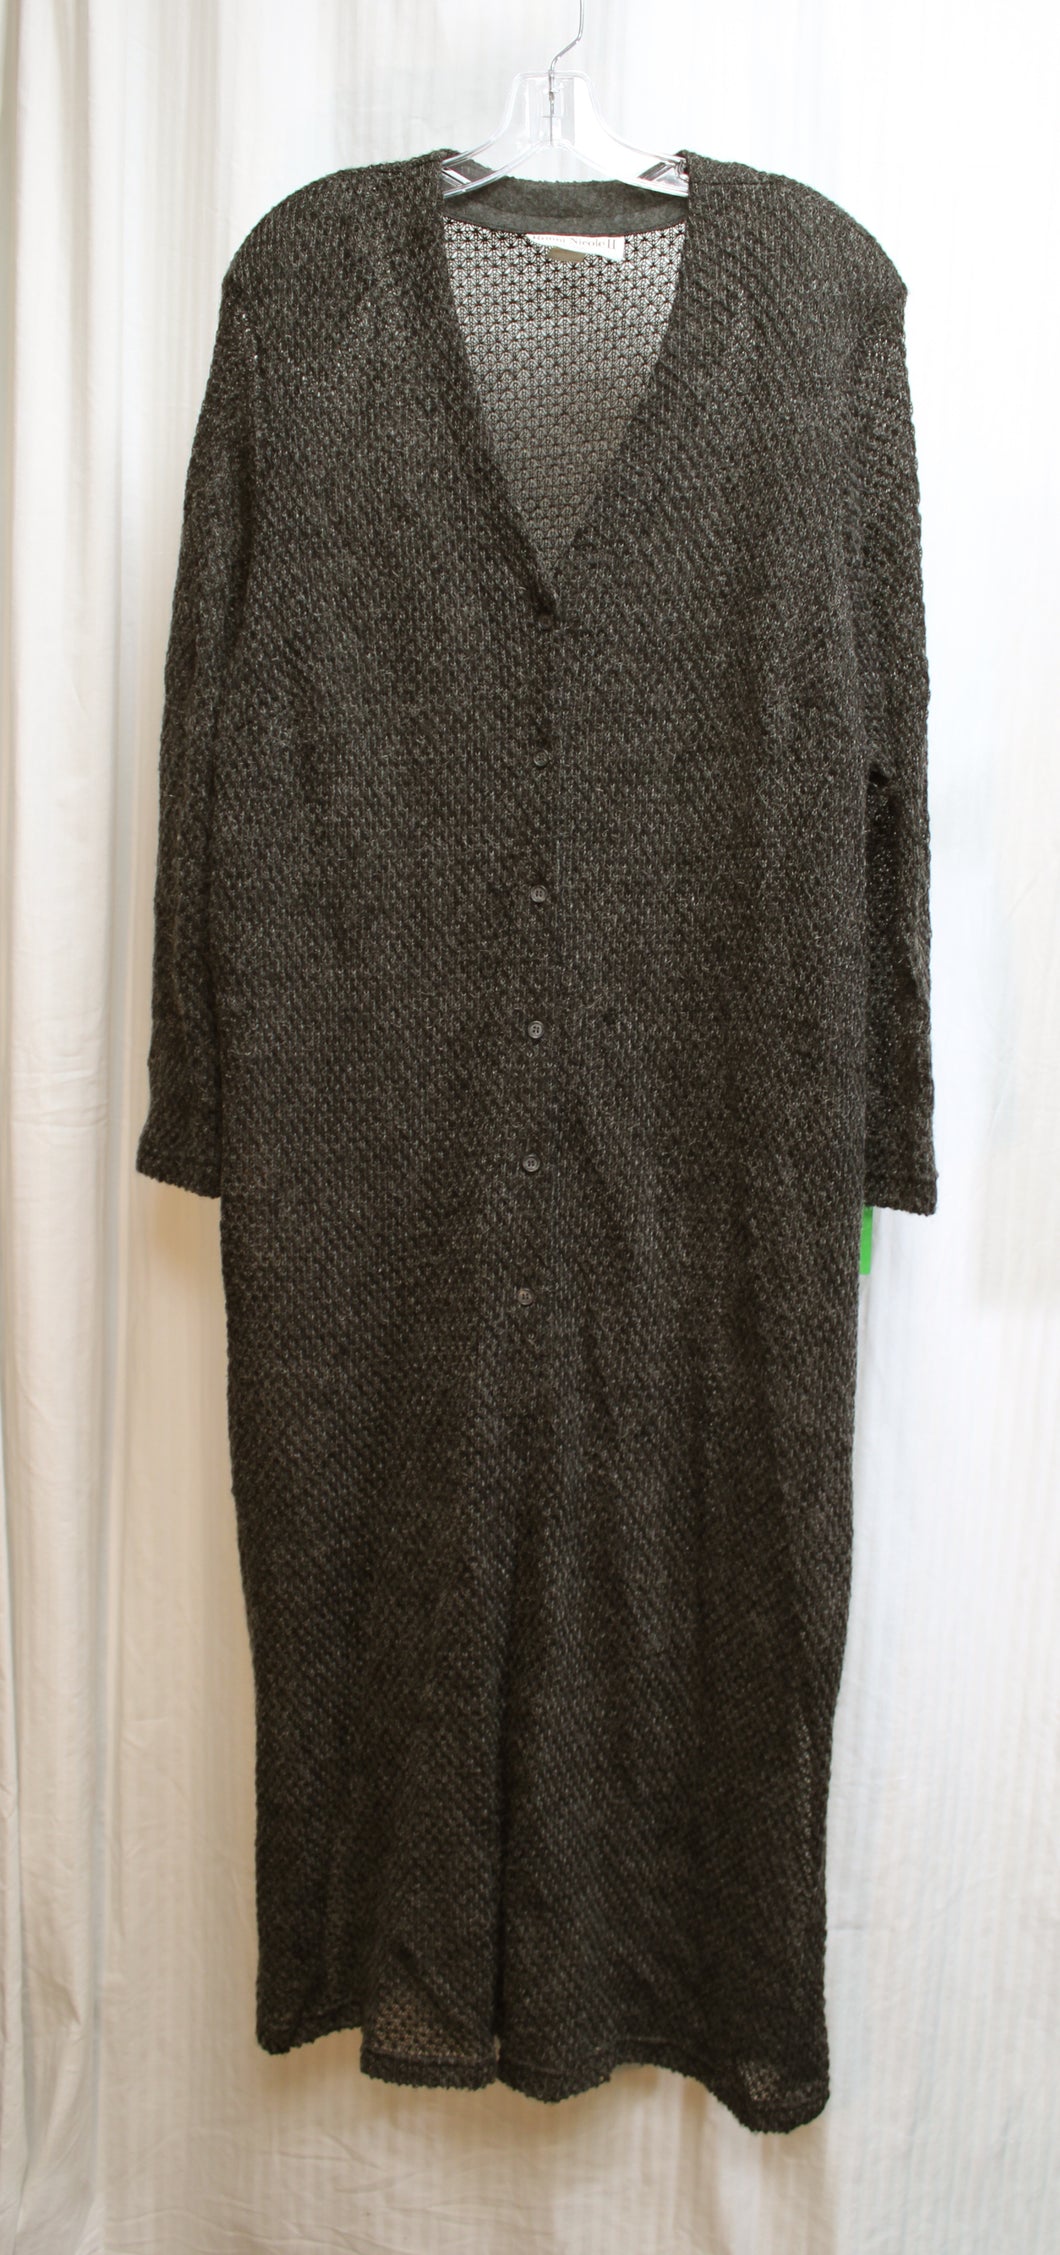 Vintage 90's - Ronni Nicole II by Ouida - Charcoal Heathered Semi Open Weave Sweater Duster - Size 20W